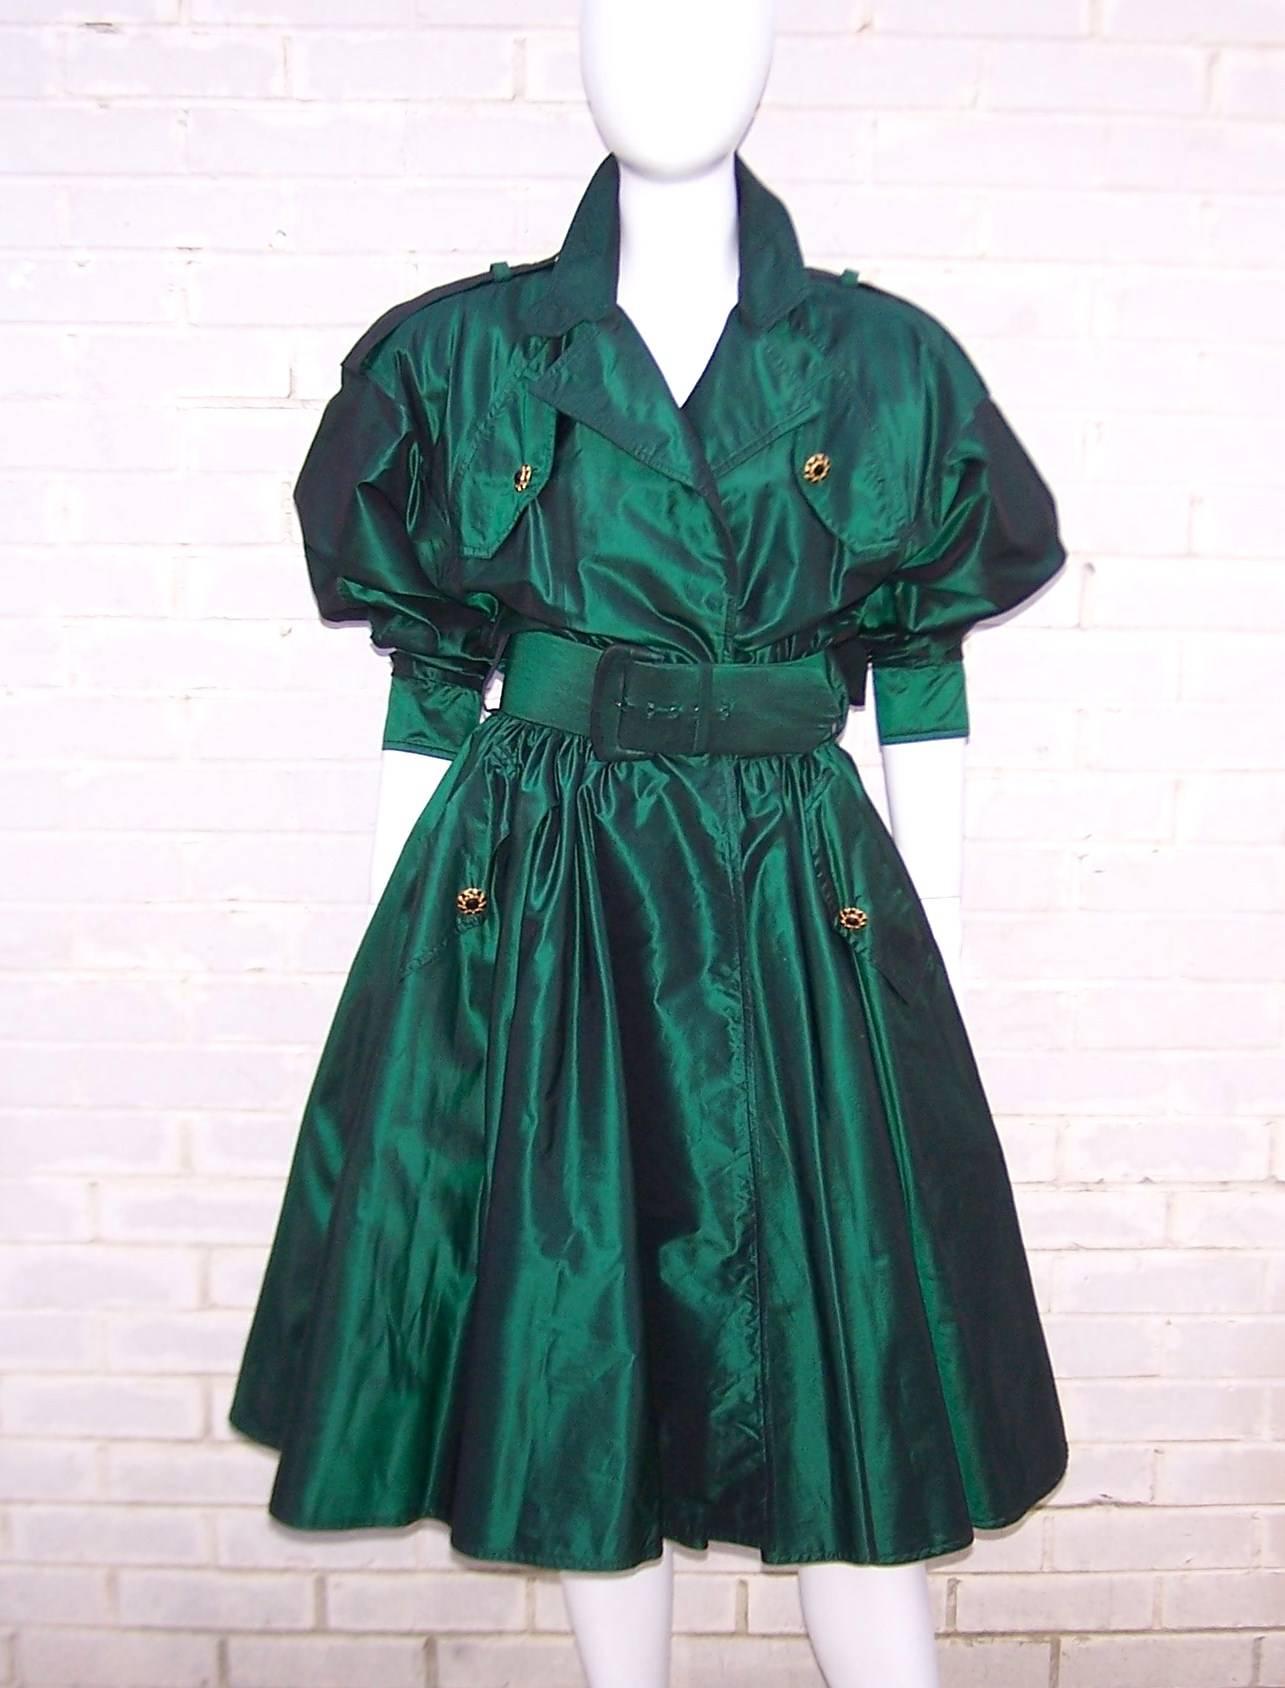 Michael Casey's background as a costume designer is at work on this dramatic green taffeta trench coat style dress. The fabric is pure silk backed with netting at the skirt and fully lined for comfort. The effect is a voluminous skirt which is